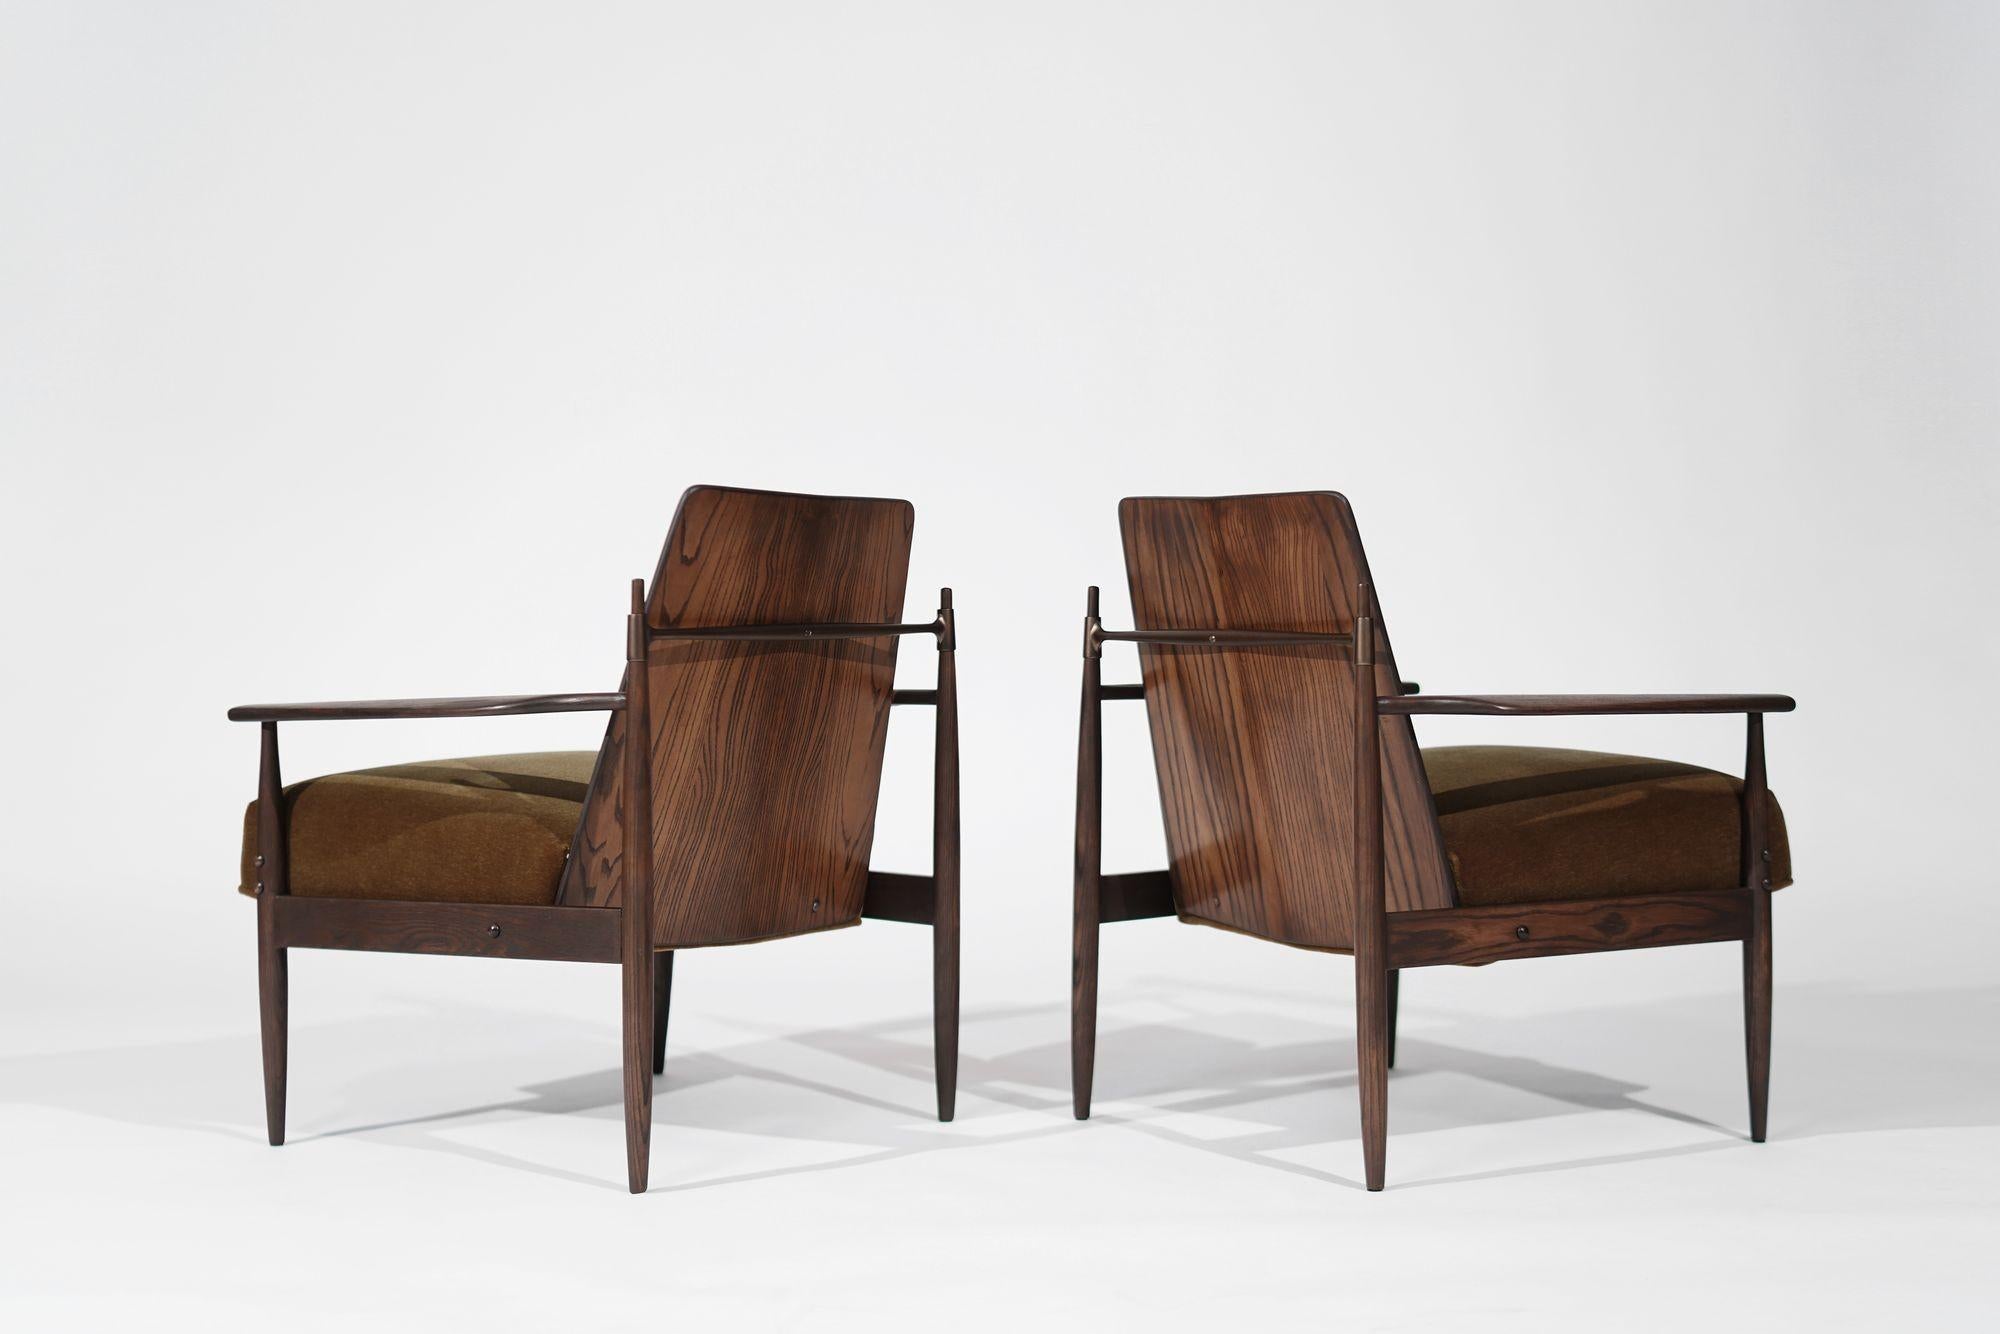 American Set of Oak, Mohair and Bronze Lounge Chairs by Dan Johnson, C. 1950s For Sale